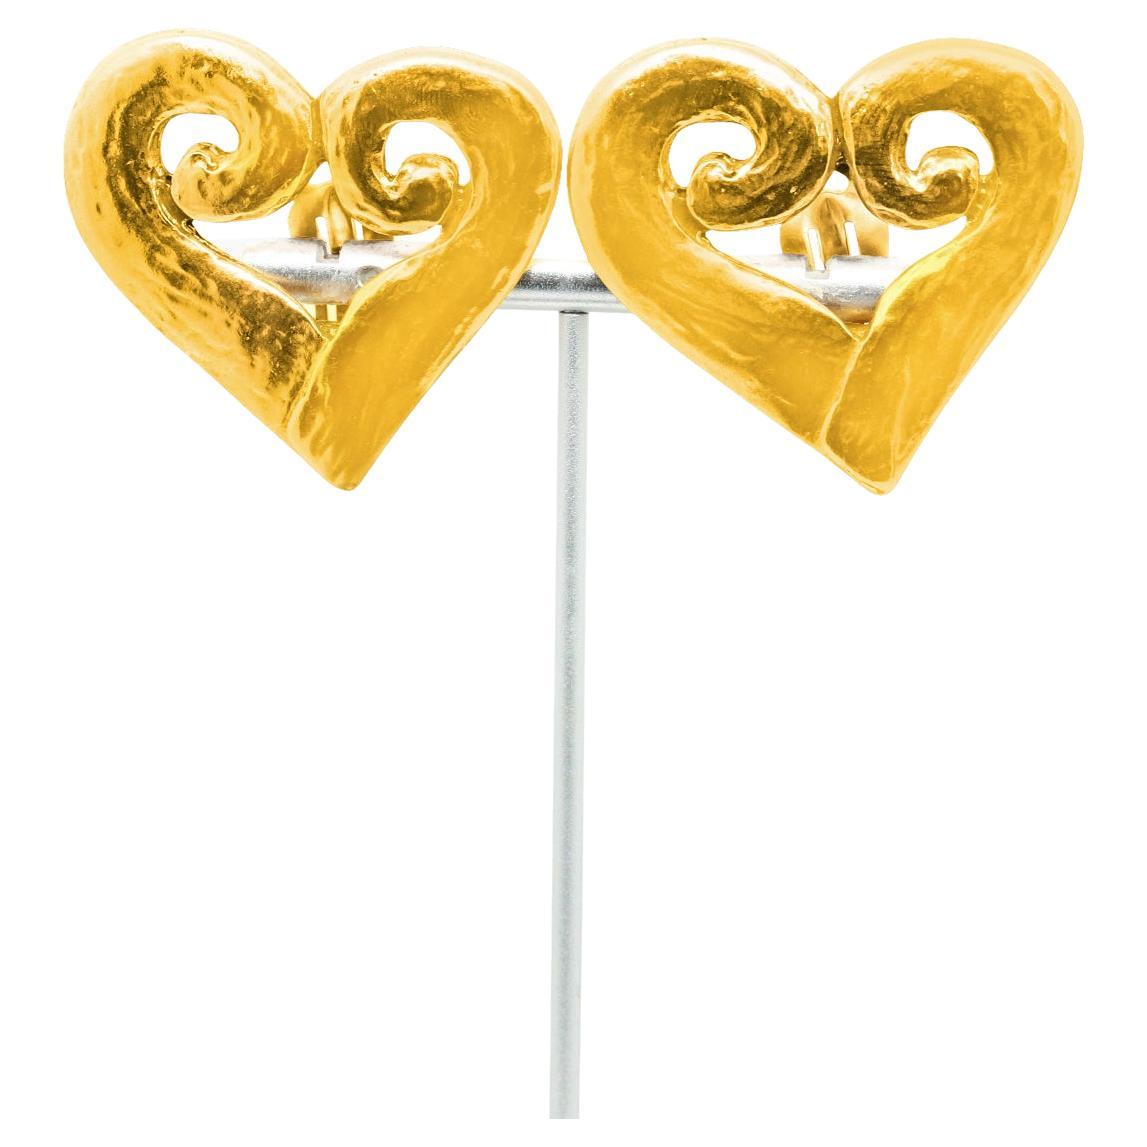 Vintage Yves Saint Laurent YSL Gold Open Heart Earrings. Clip On.  People always know this is YSL. These are very classic earrings that exude chic. 

If you remind me I will send velcro dots so these earrings will comfortably stay on for hours and